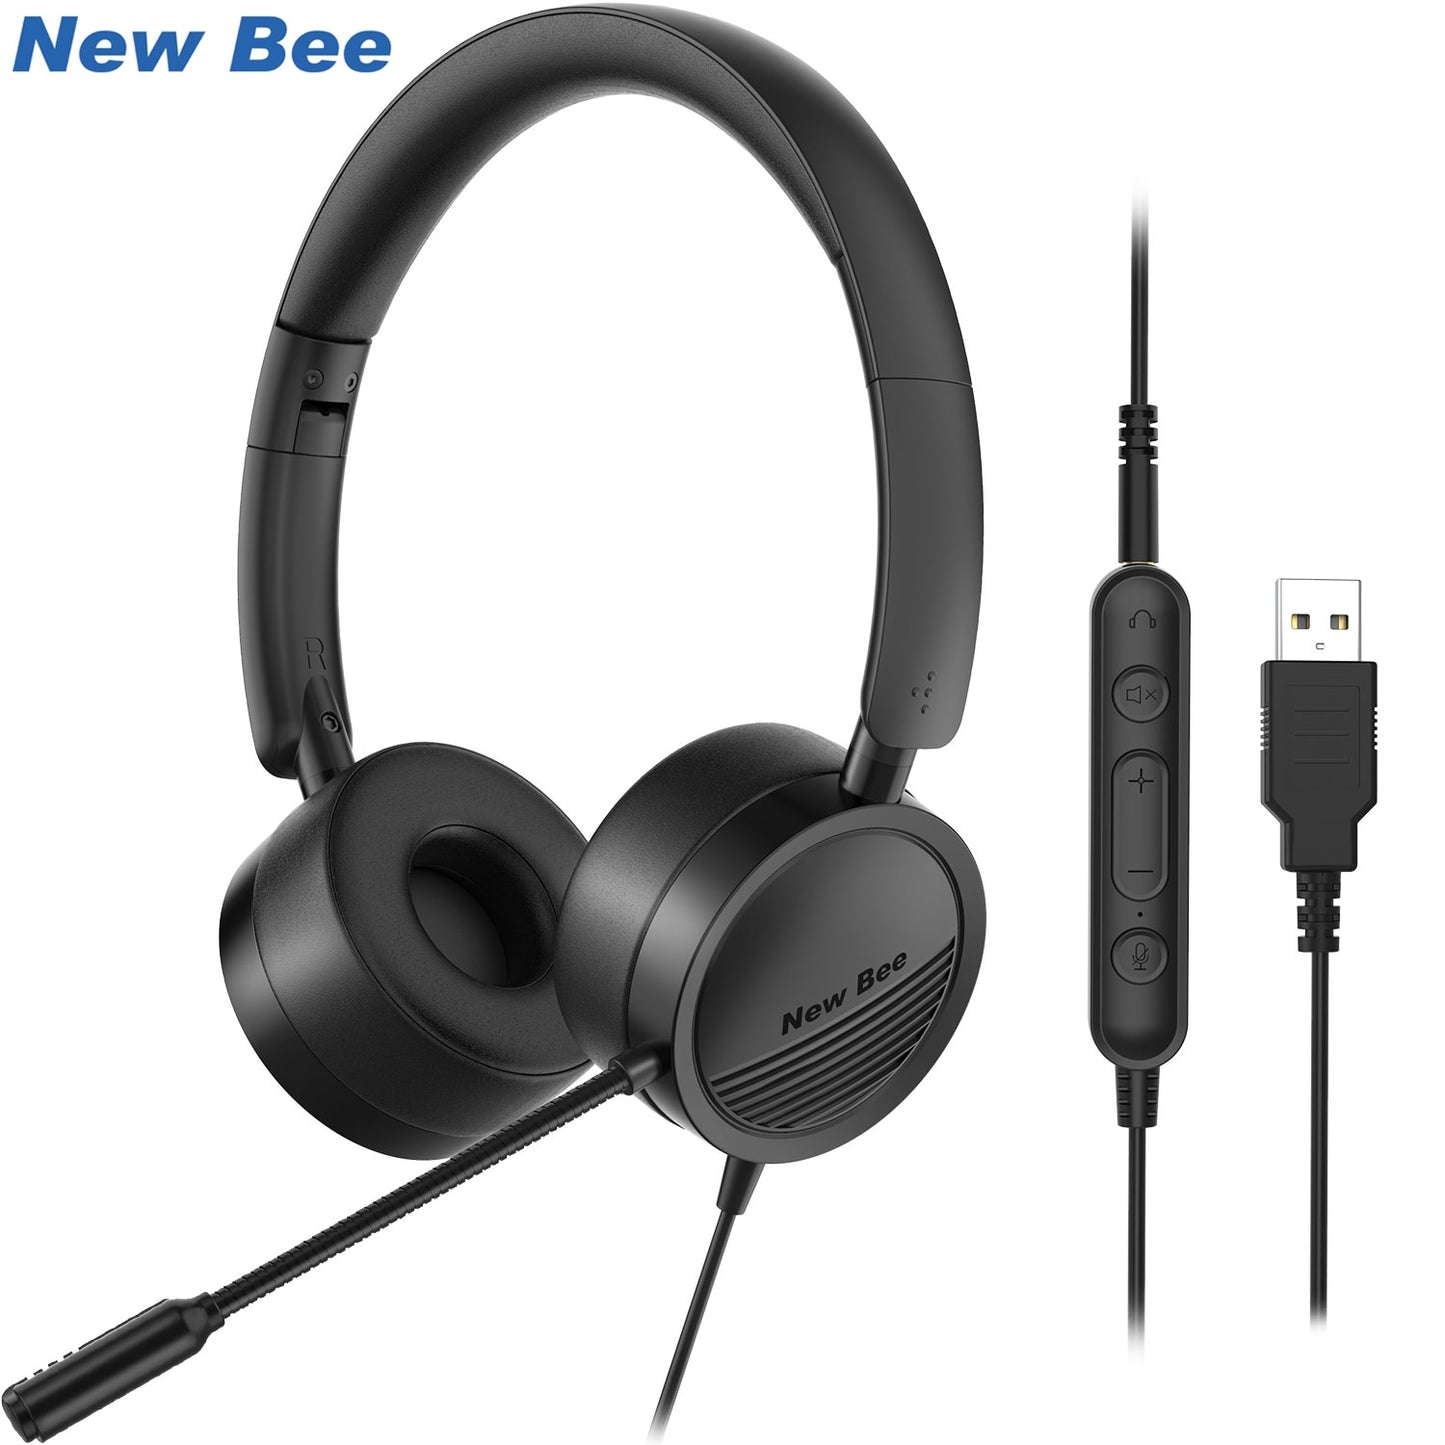 New Bee USB Headset with Microphone for PC 3.5mm Business Headsets with Mic Mute Noise Cancelling for Call Center Headphones